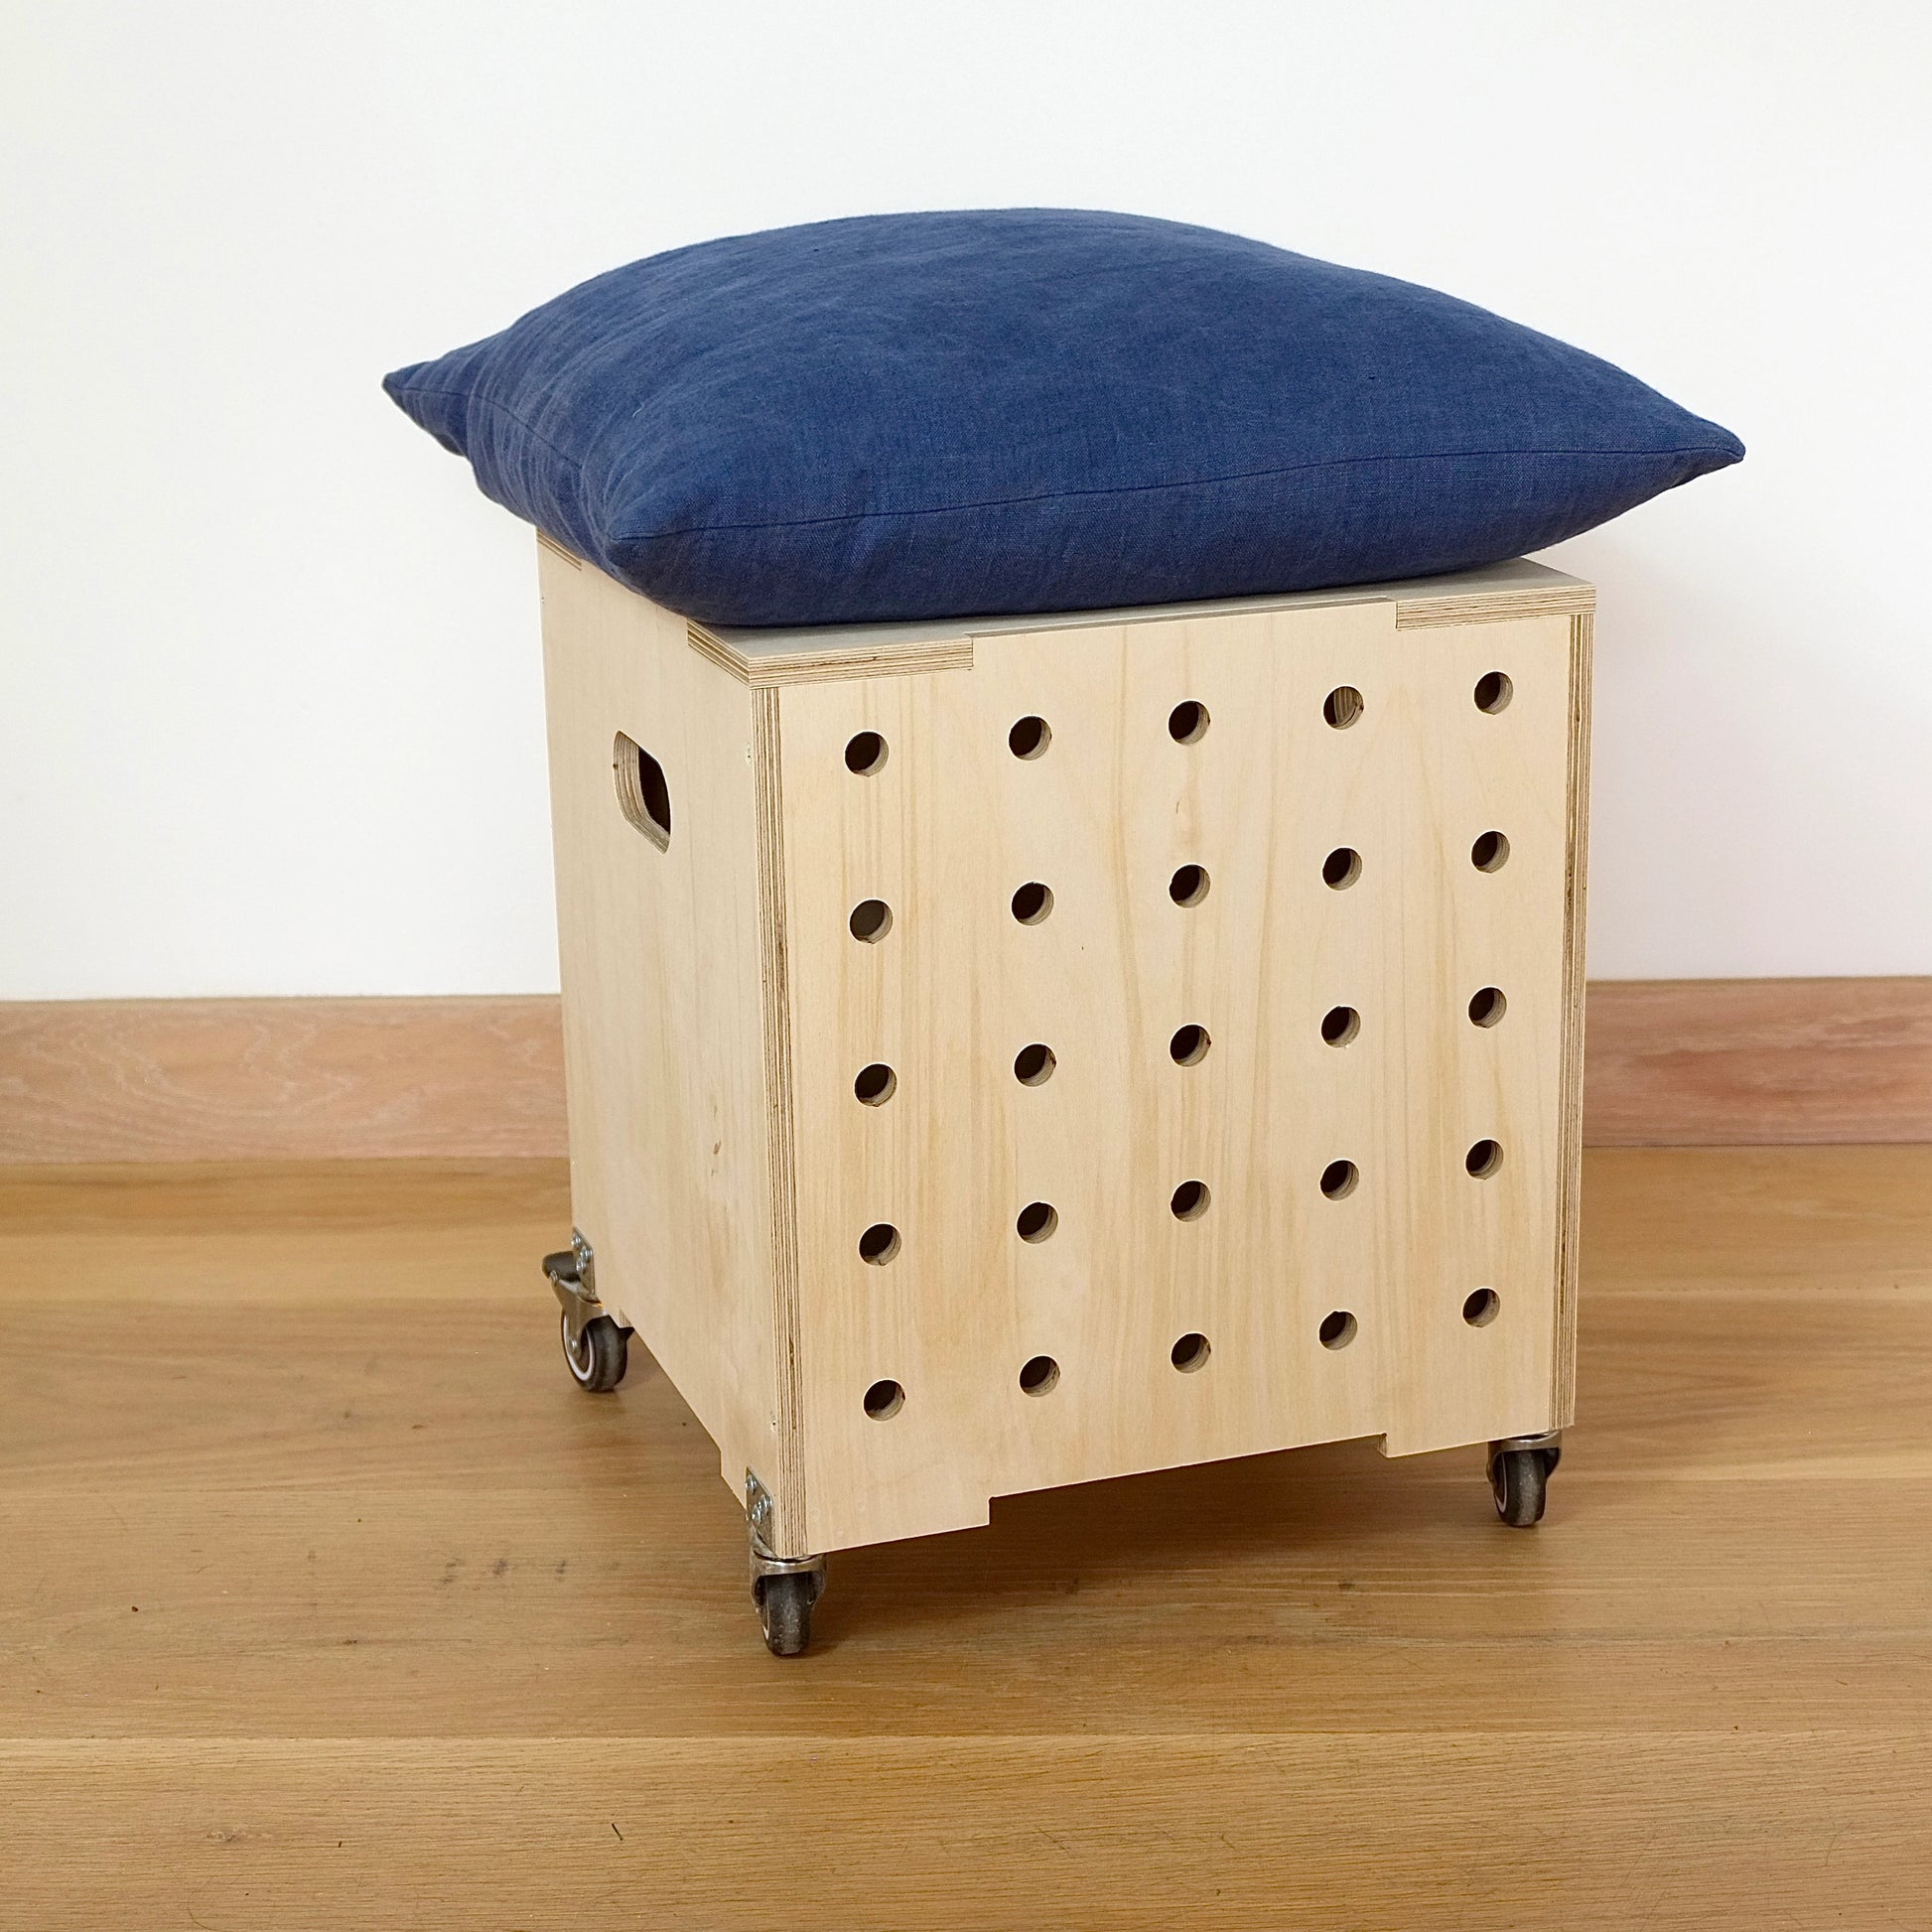 Birch plywood square storage stool on castors with 5 rows of vertical holes running down front with denim cushion on top, sitting on a wood floor against a white wall